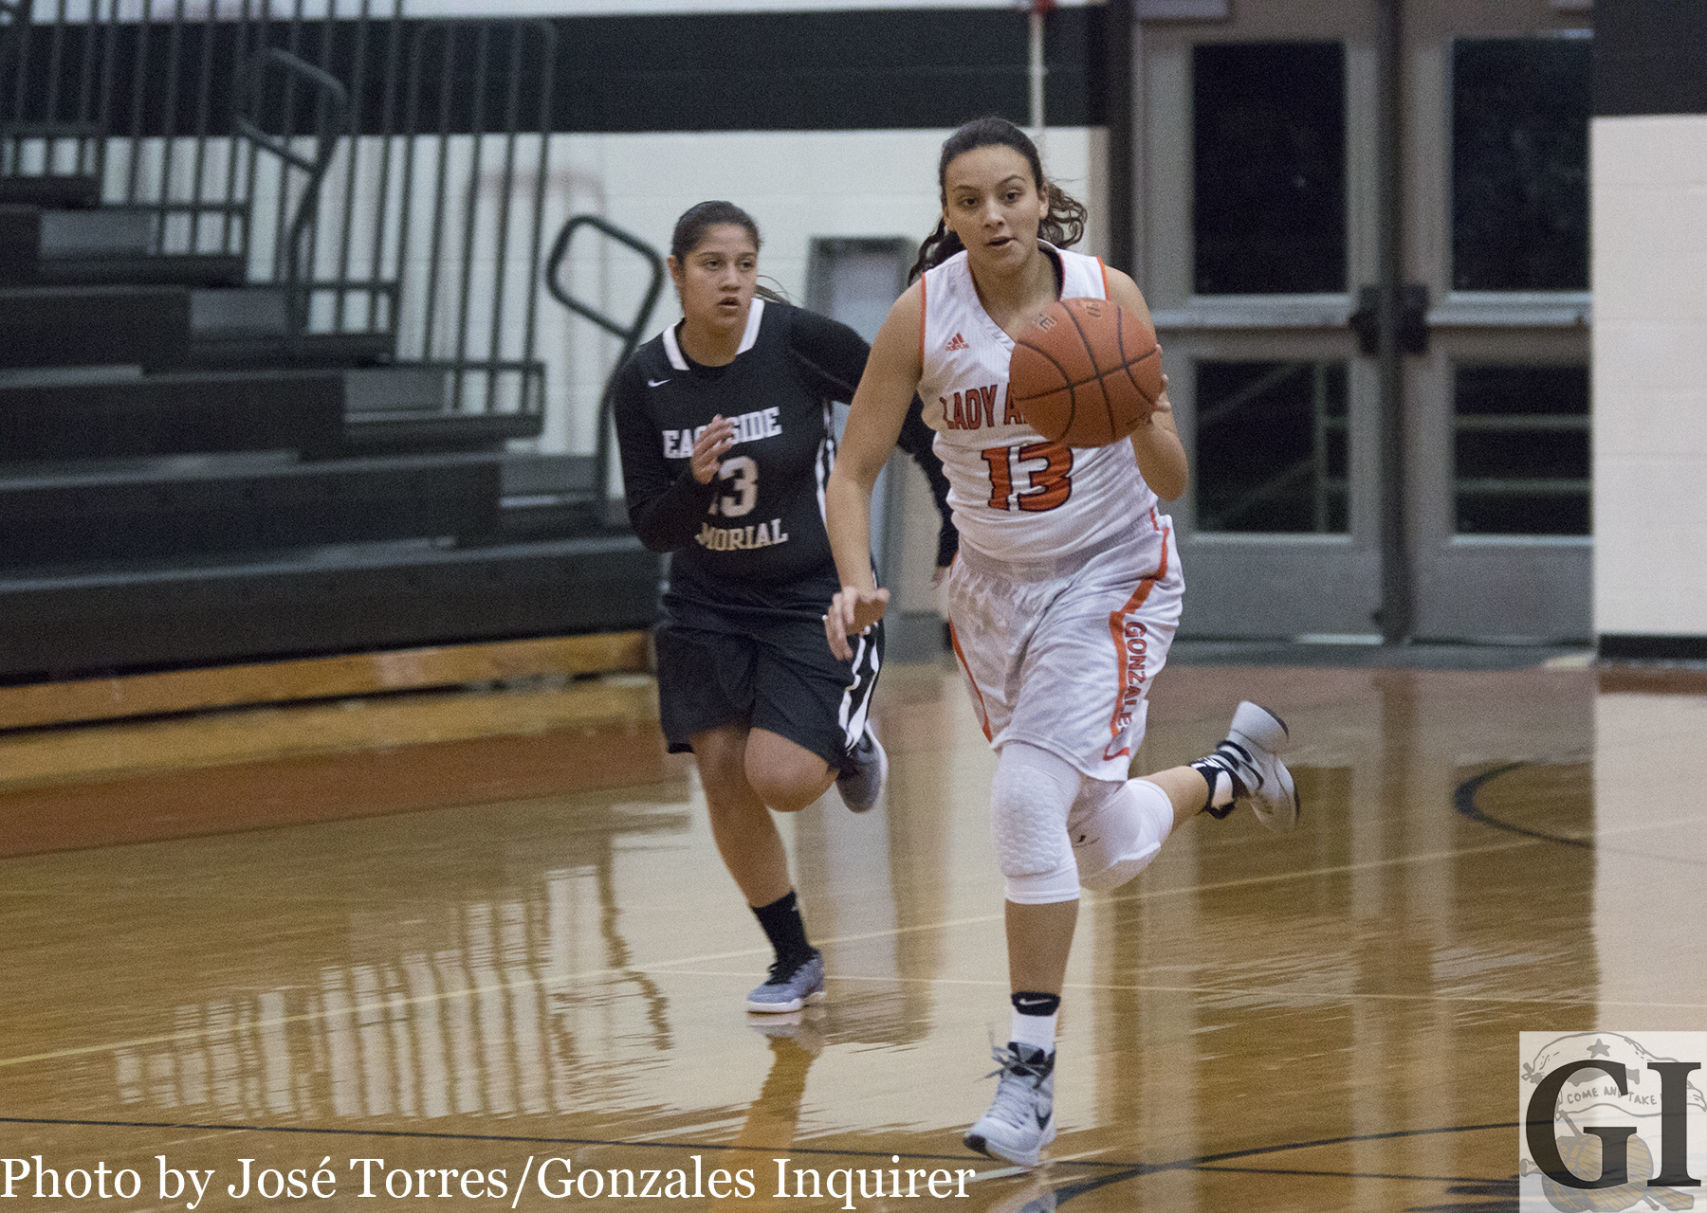 Hailey Riojas (13) had a big night Friday, scoring 13 points in Gonzales’ 70-35 win.